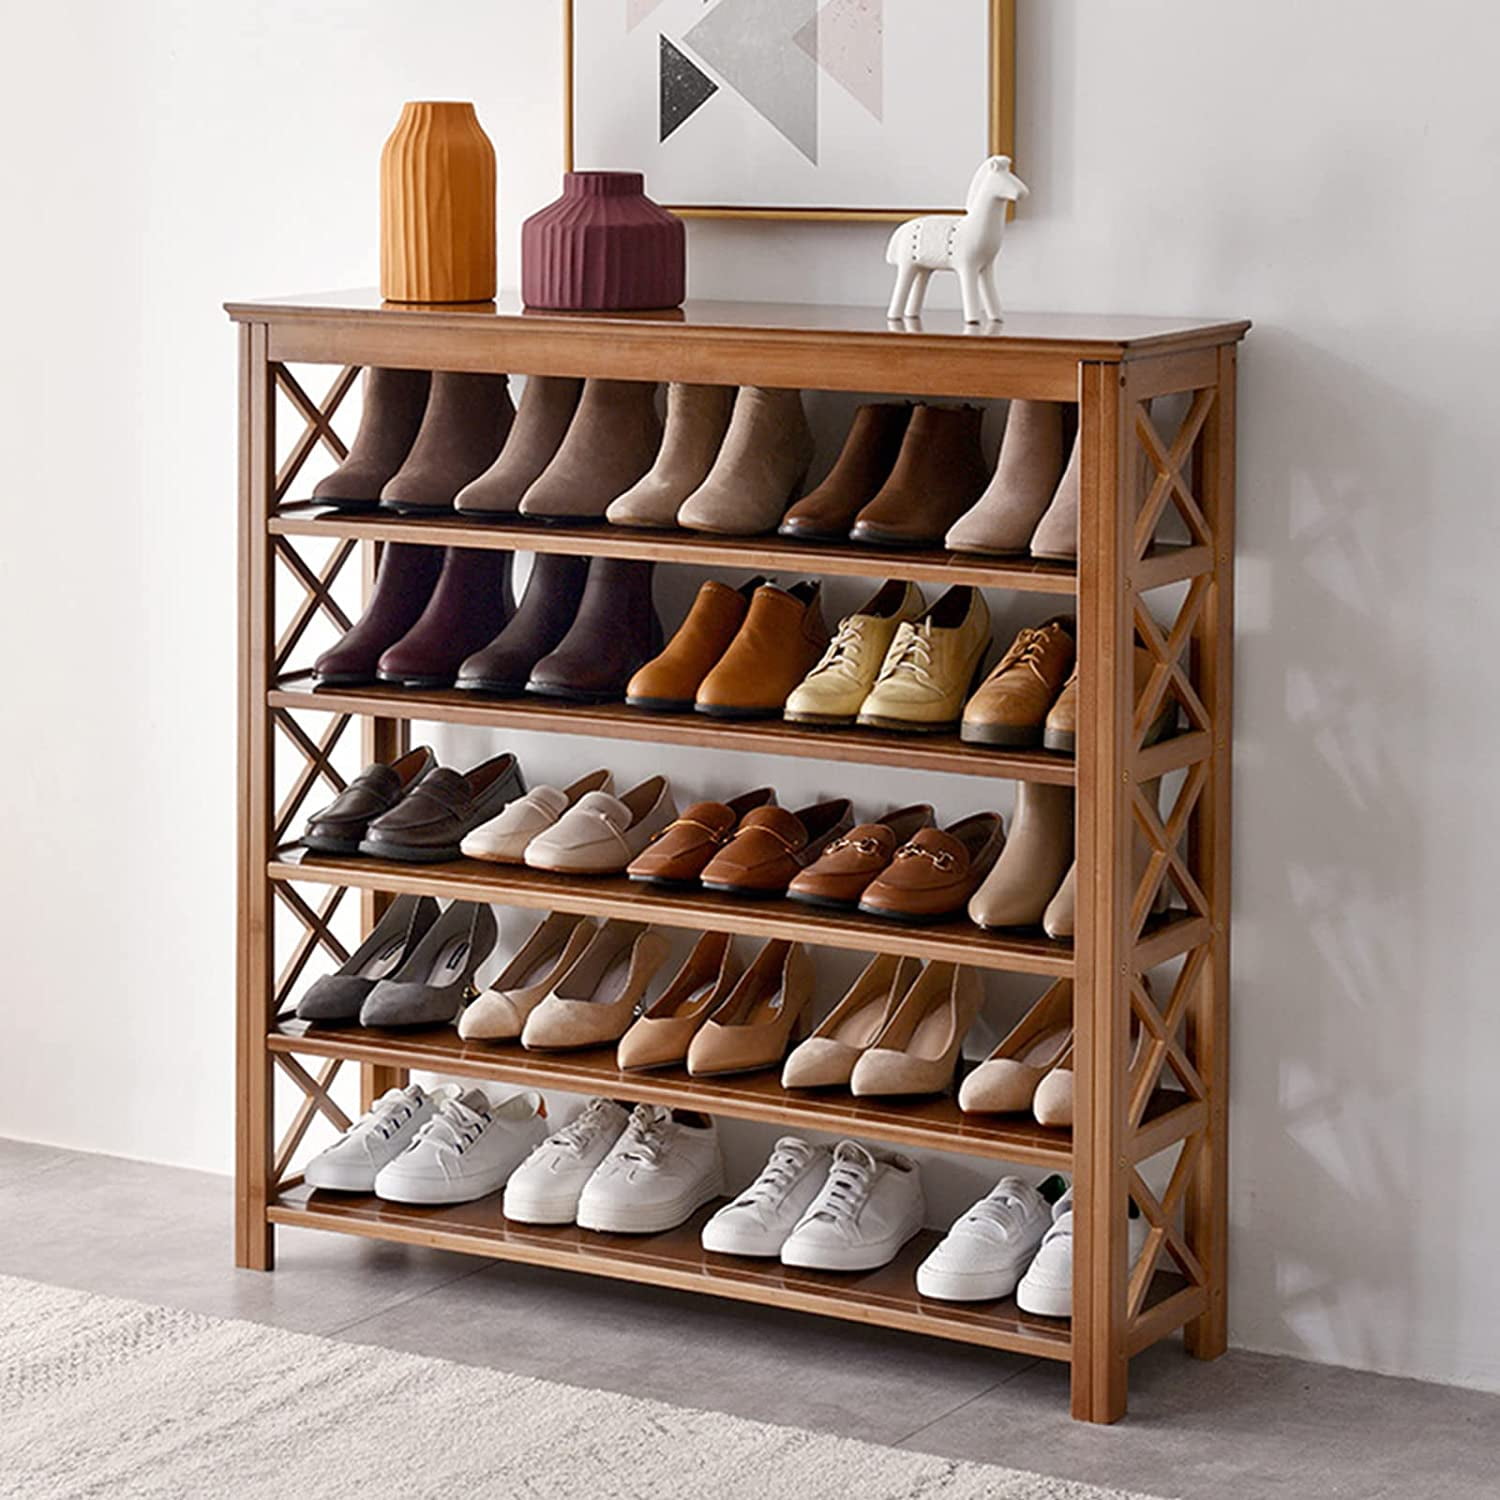 Organize It All Bamboo Shoe Rack with Umbrella Stand, Natural Wood Shoe  Storage, 2 Tier, 6 Pair Capacity, Freestanding, 31.5-inH x 10.25-inW x  30.5-inL in the Shoe Storage department at